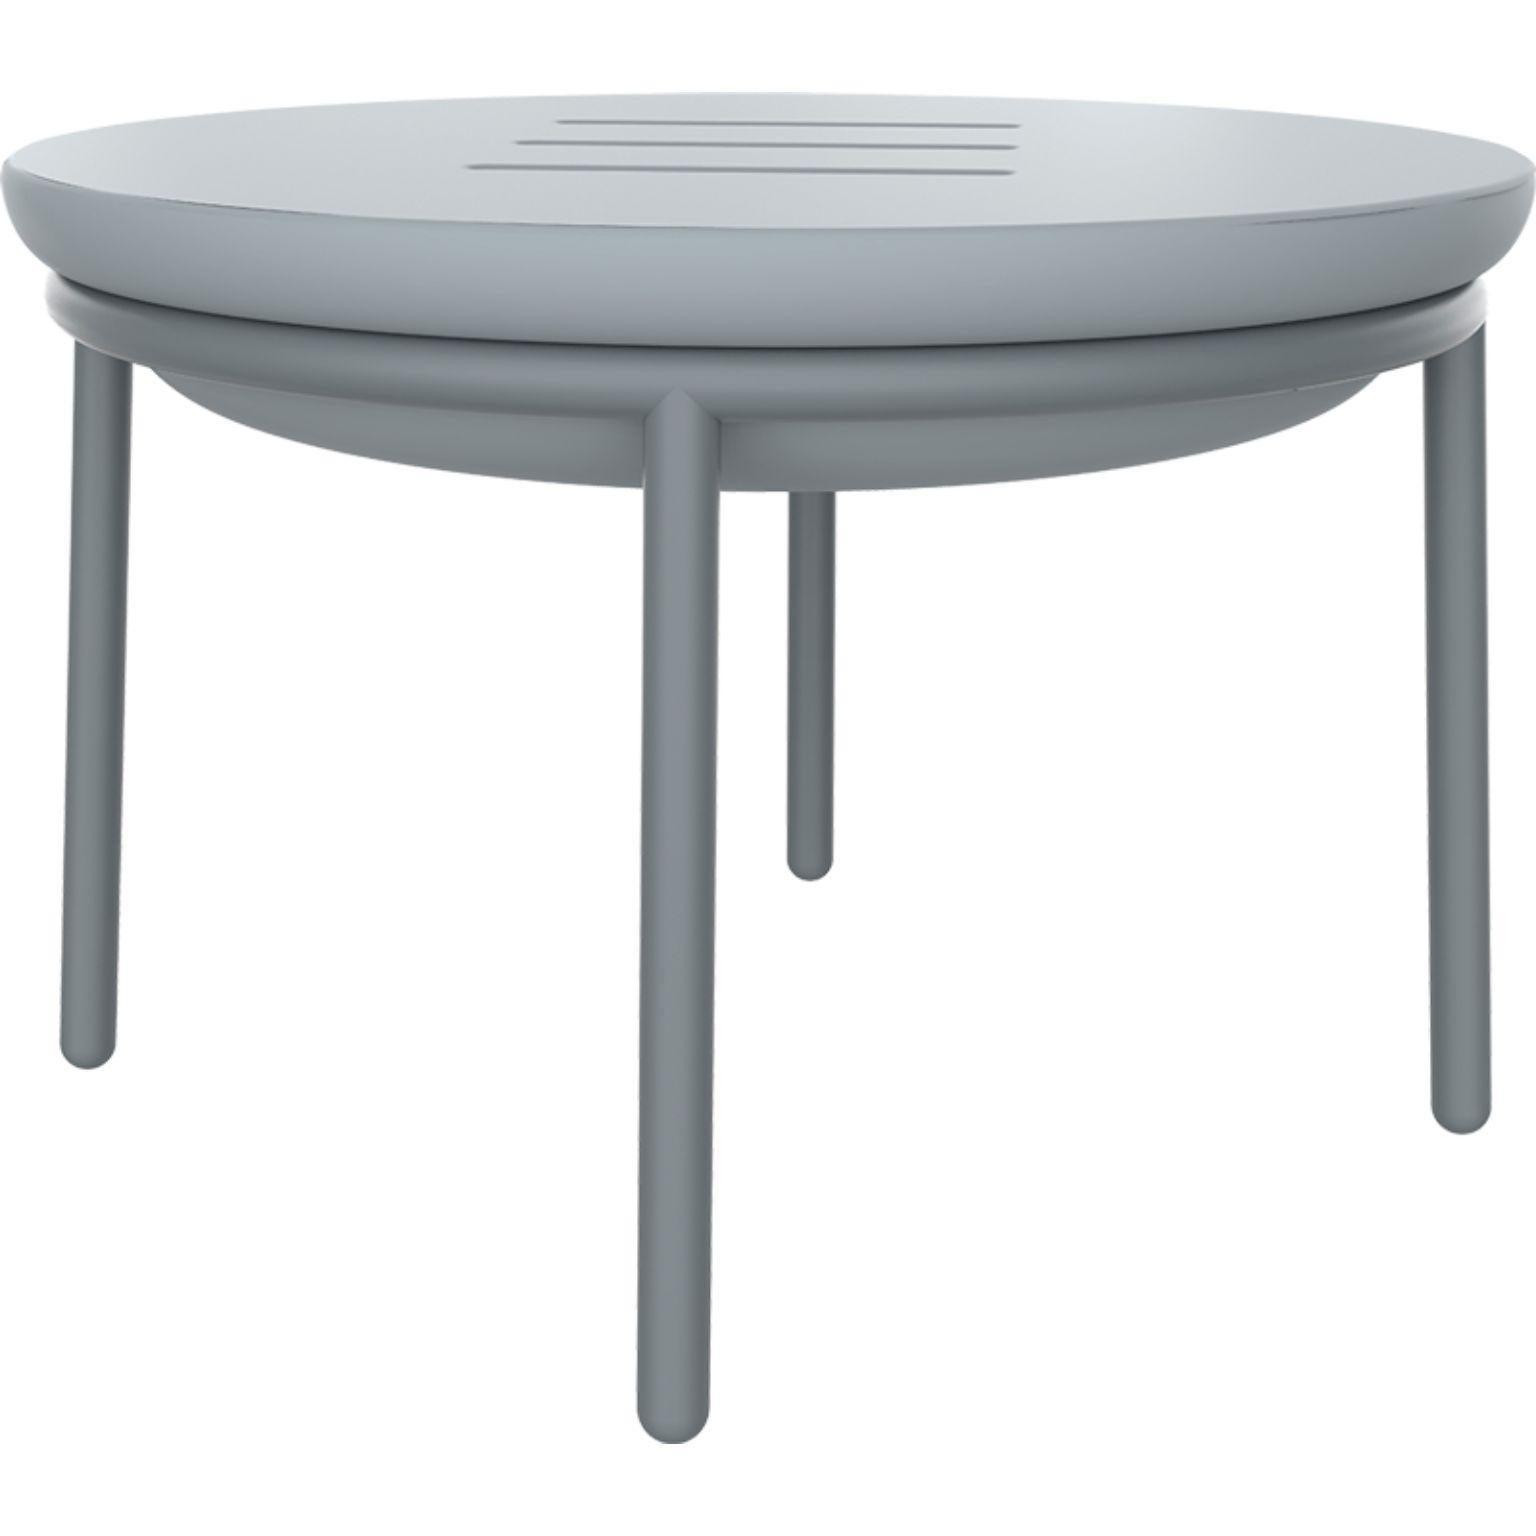 Stainless Steel Lace Cream 60 Low Table by Mowee For Sale